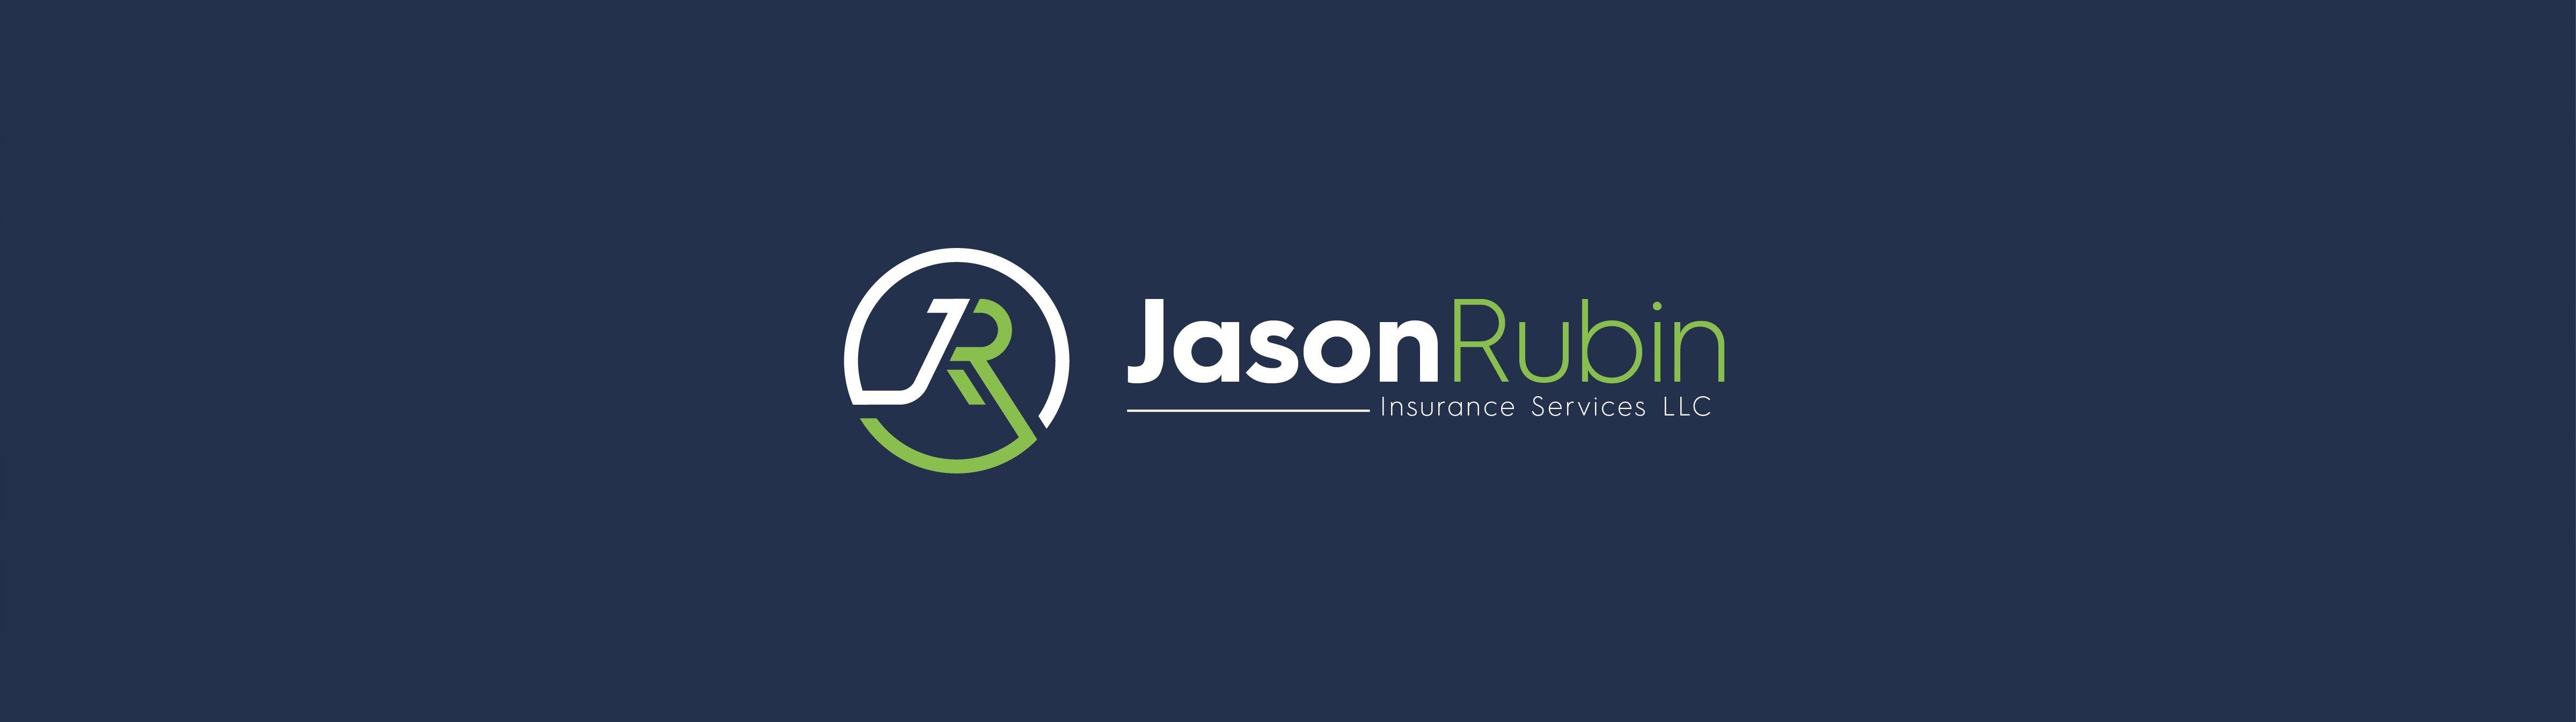 Jason Rubin Insurance Services Introduces Customized Medicare Guidance for Unmatched Experience